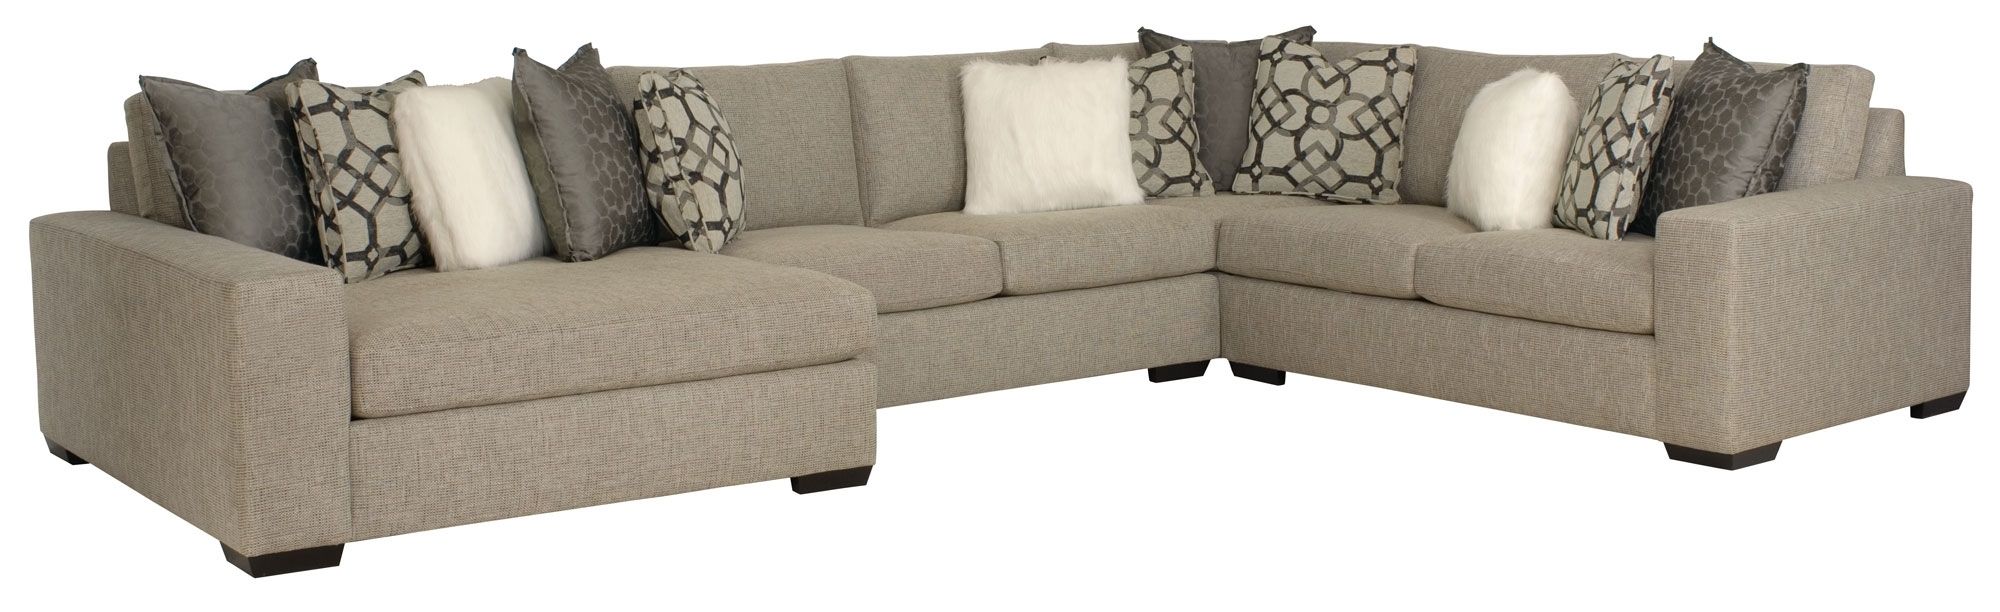 Sectional Sofa Design: Best Selling Bernhardt Sectional Sofa With Regard To Most Recent Orlando Sectional Sofas (Photo 1 of 15)